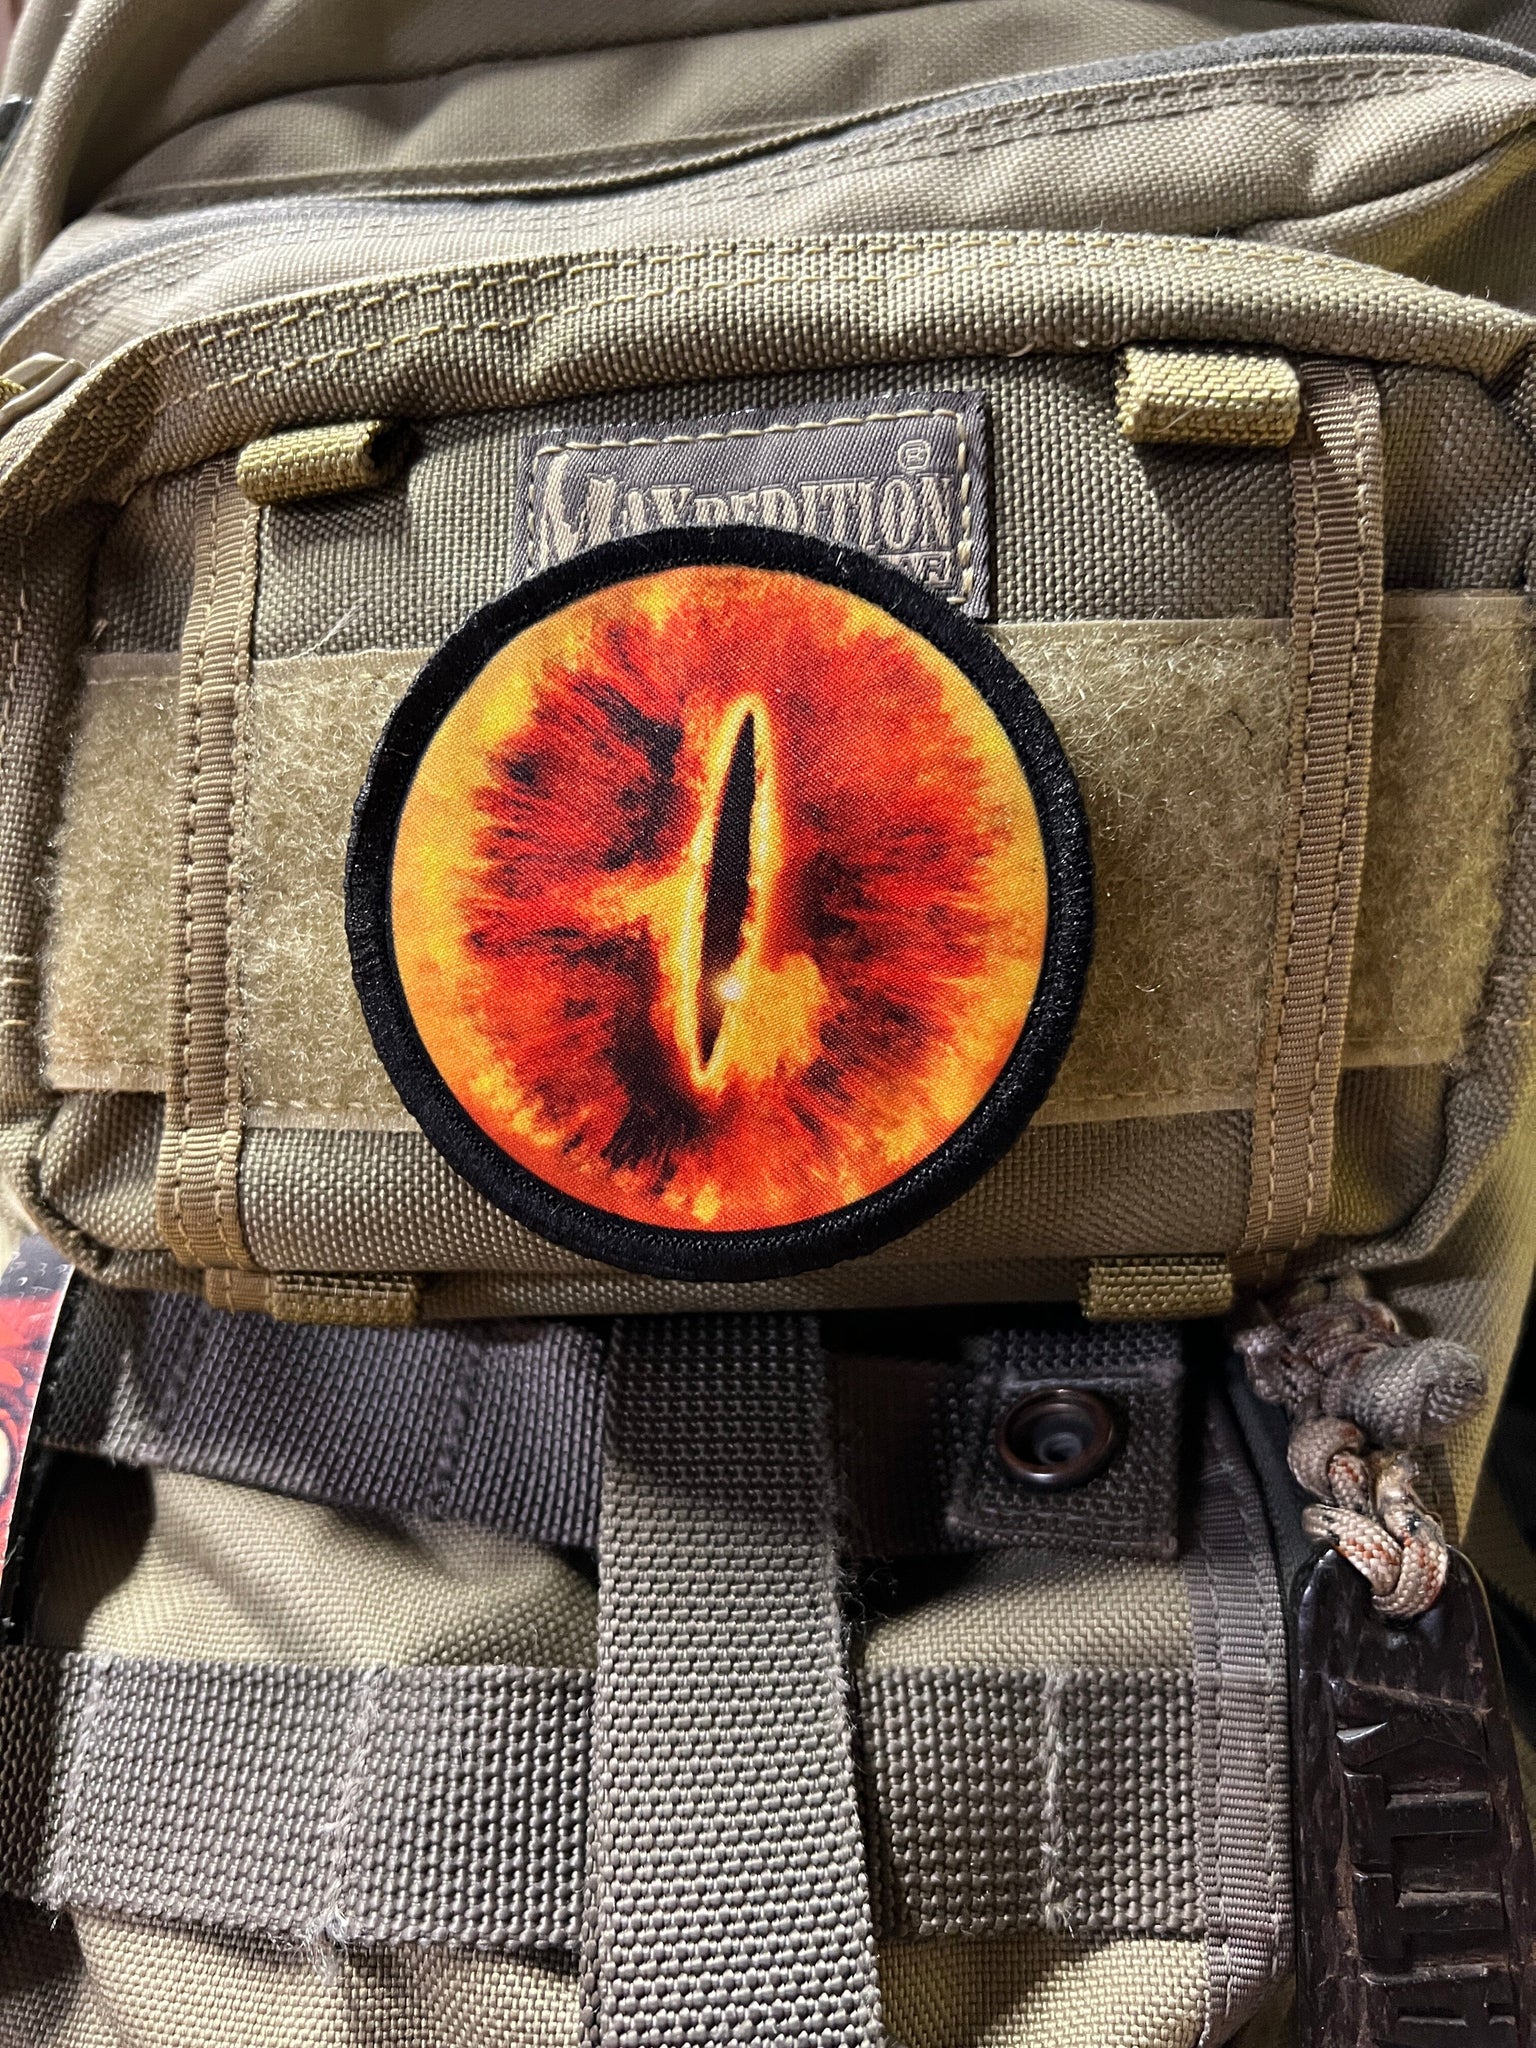 5.11 Tactical - Morale patch Monday with a few 5.11